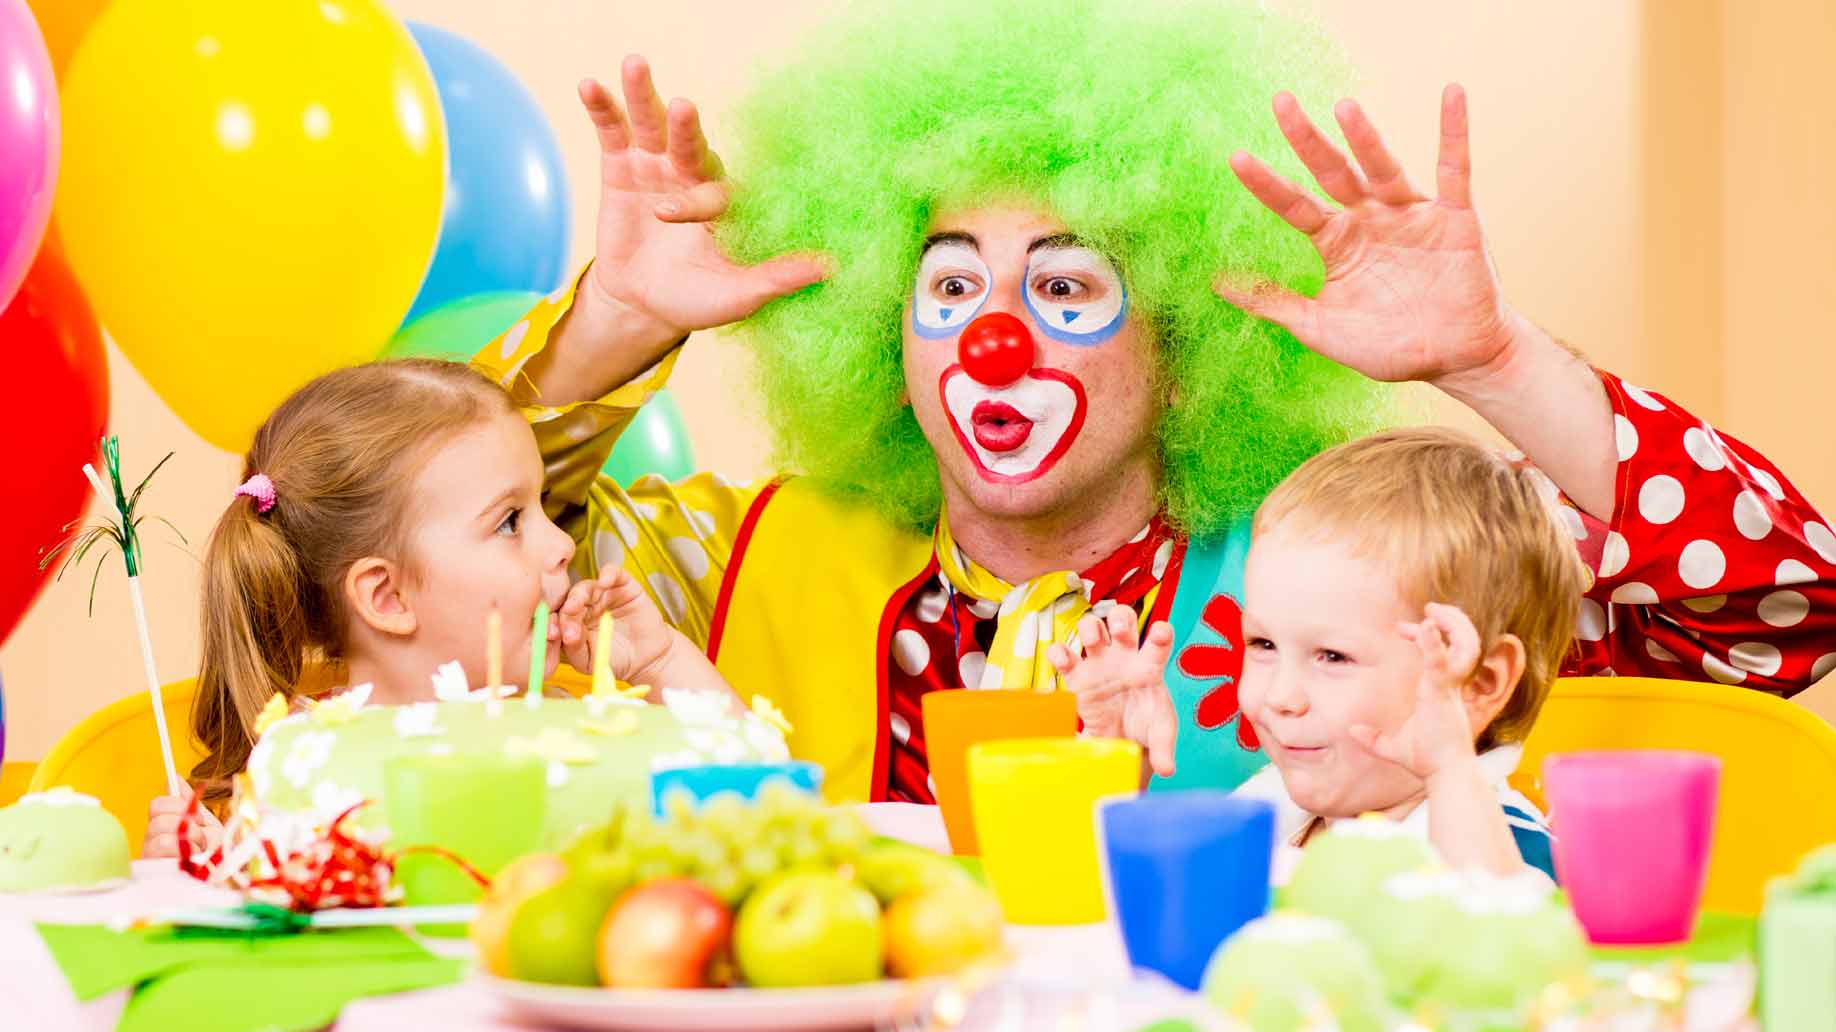 How To Hire Party Entertainers For Kids Efficiently